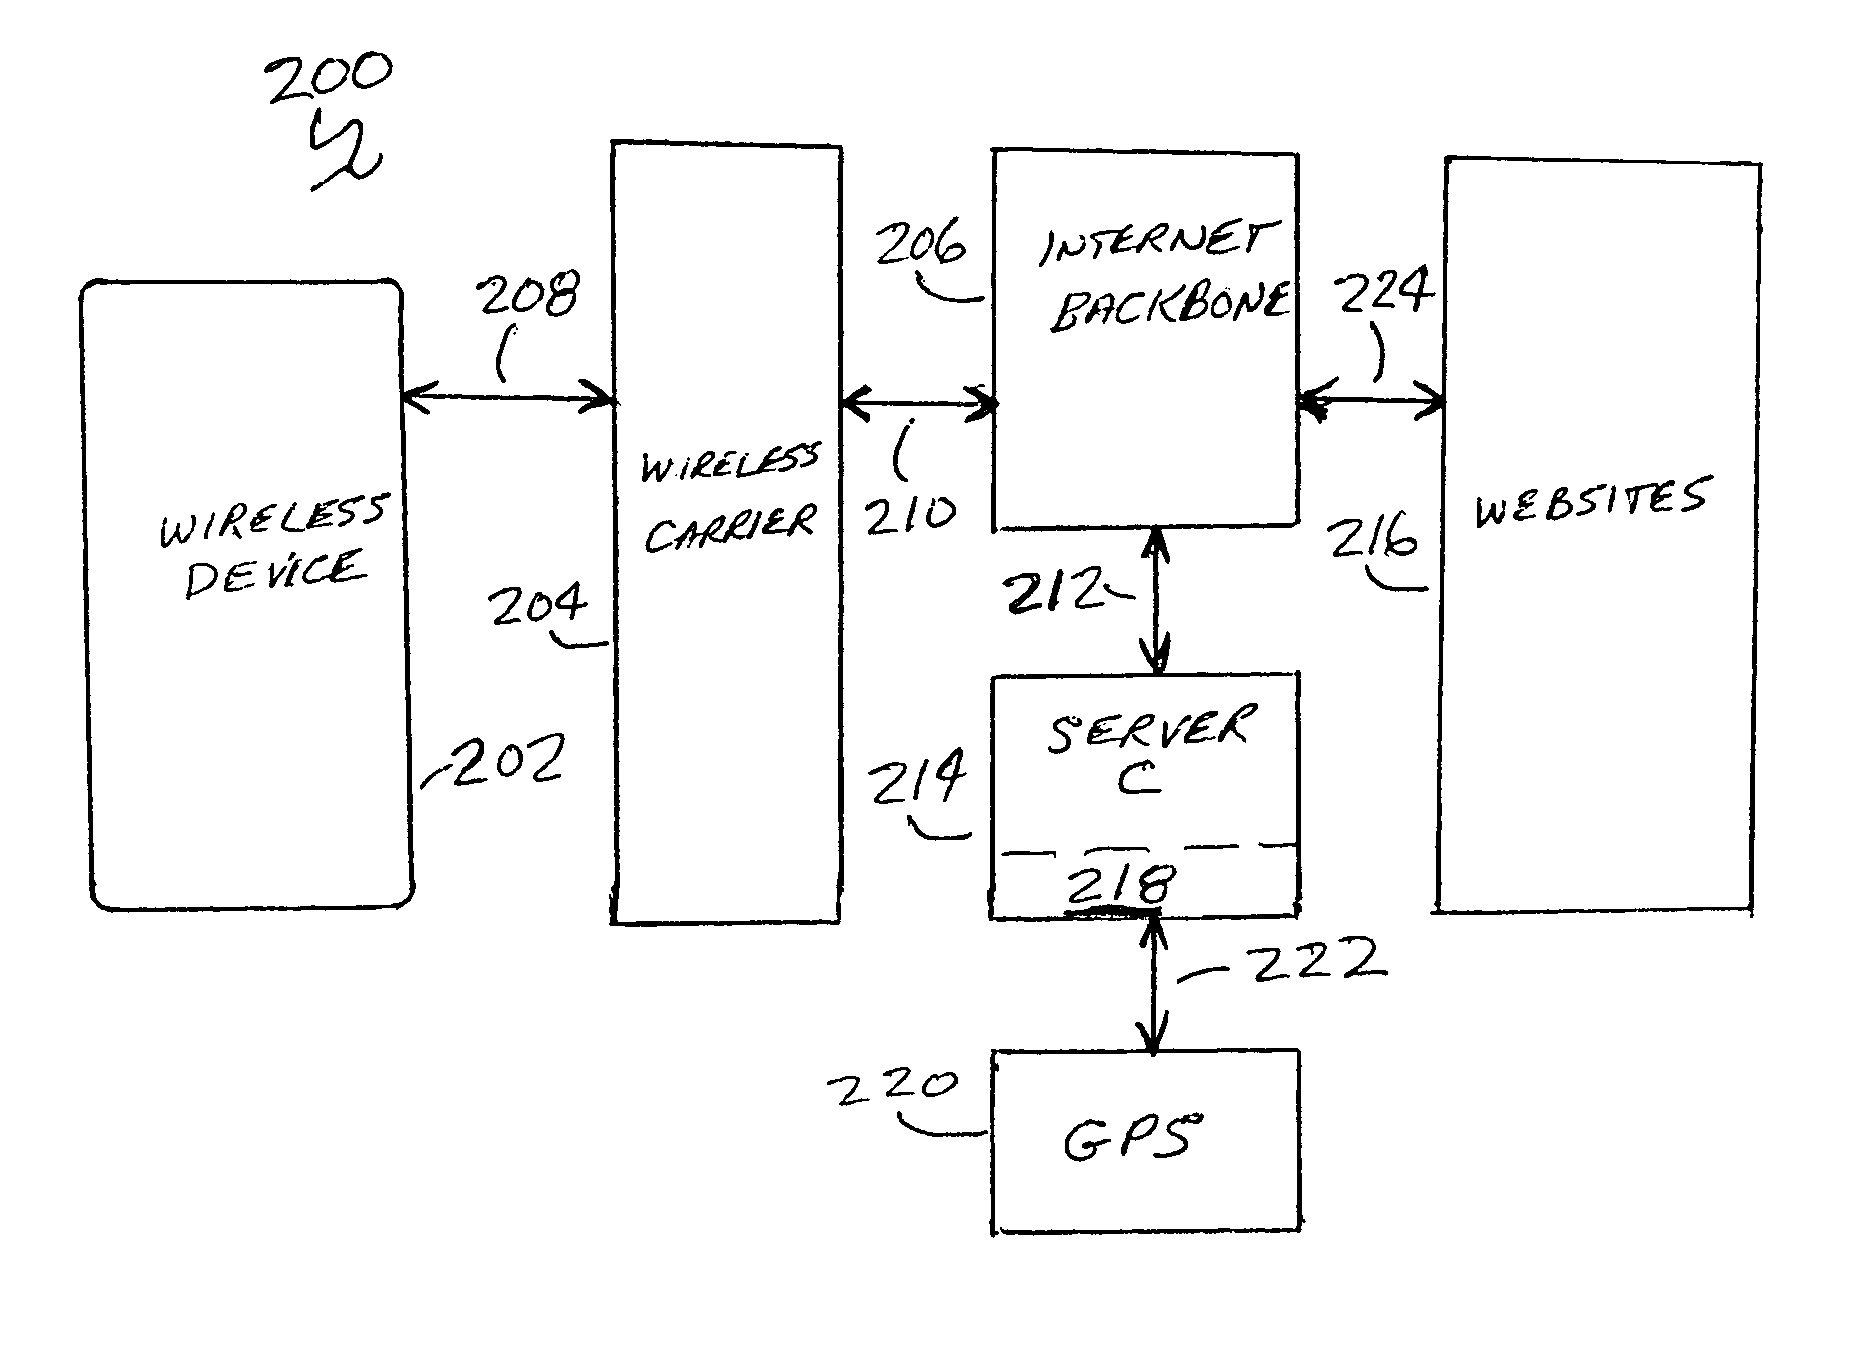 Dynamically configurable IP based wireless device and wireless networks